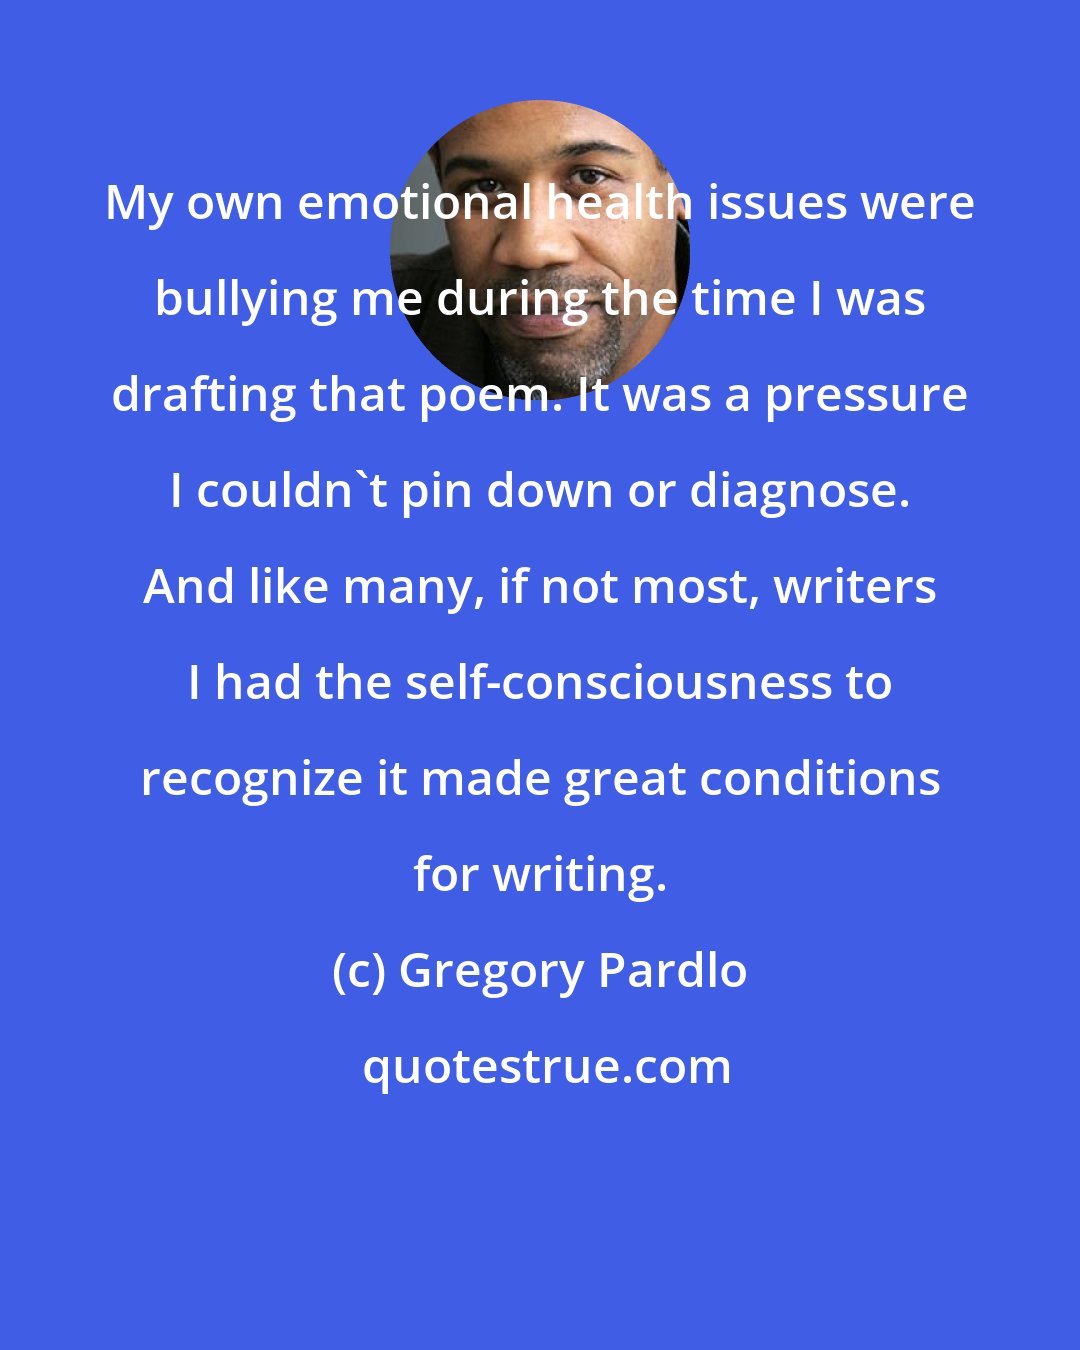 Gregory Pardlo: My own emotional health issues were bullying me during the time I was drafting that poem. It was a pressure I couldn't pin down or diagnose. And like many, if not most, writers I had the self-consciousness to recognize it made great conditions for writing.